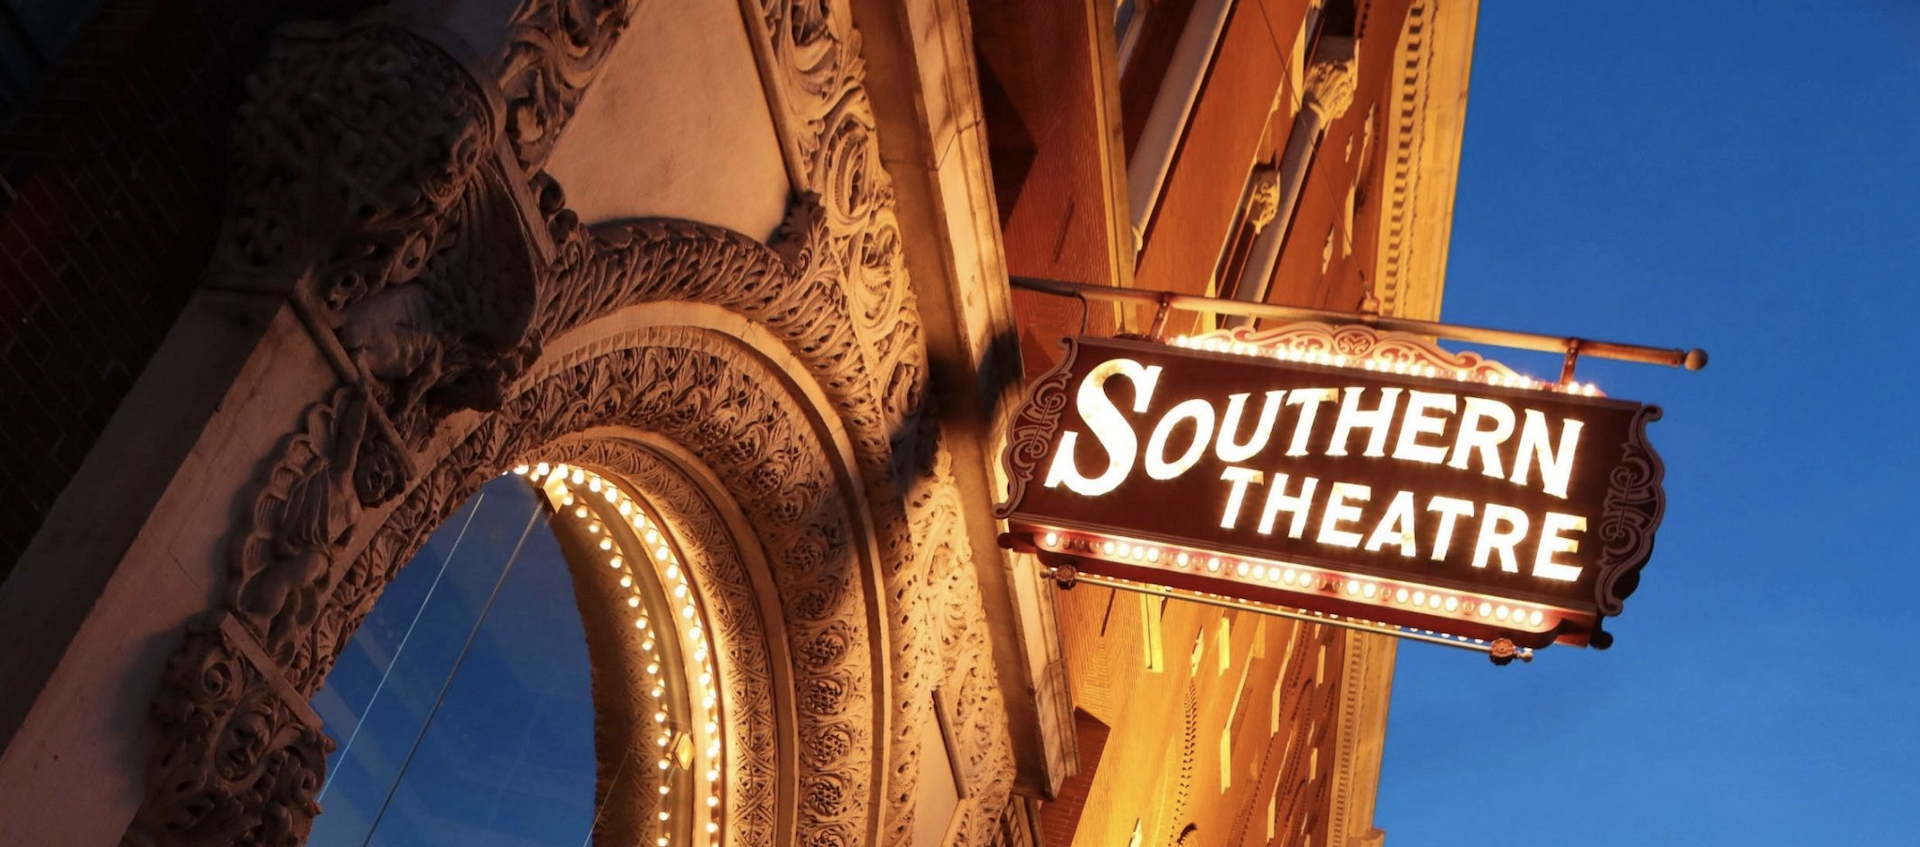 Southern Theatre marquee